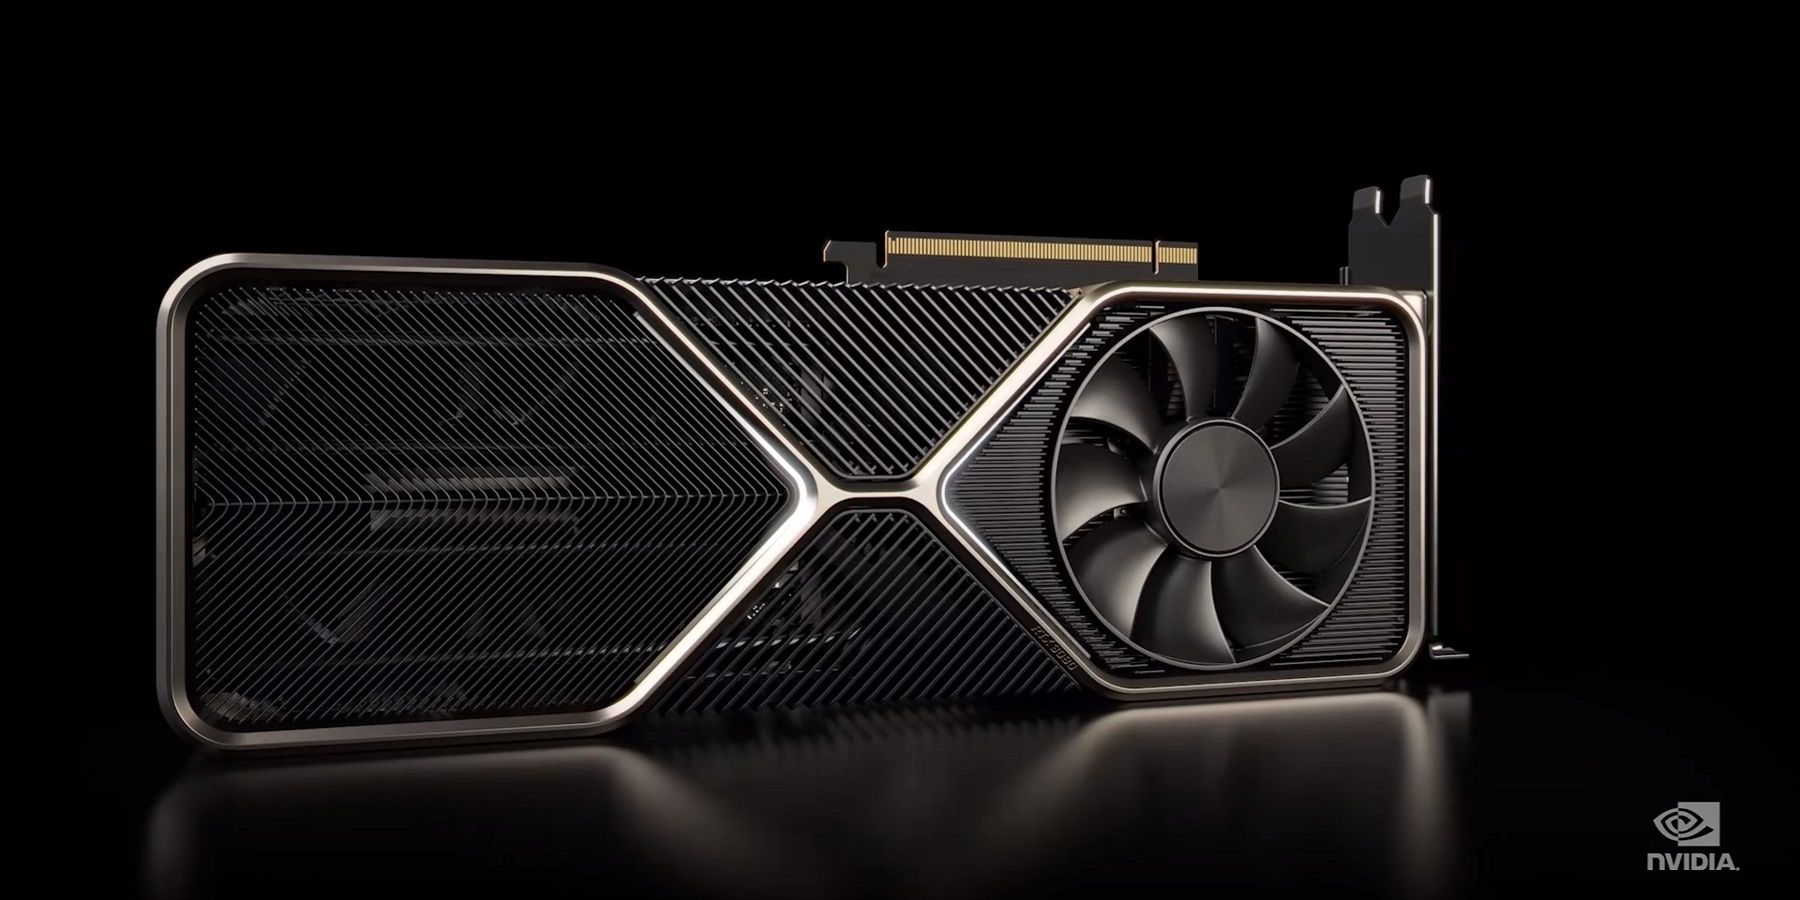 A photo of an Nvidia RTX graphics card on a black background.